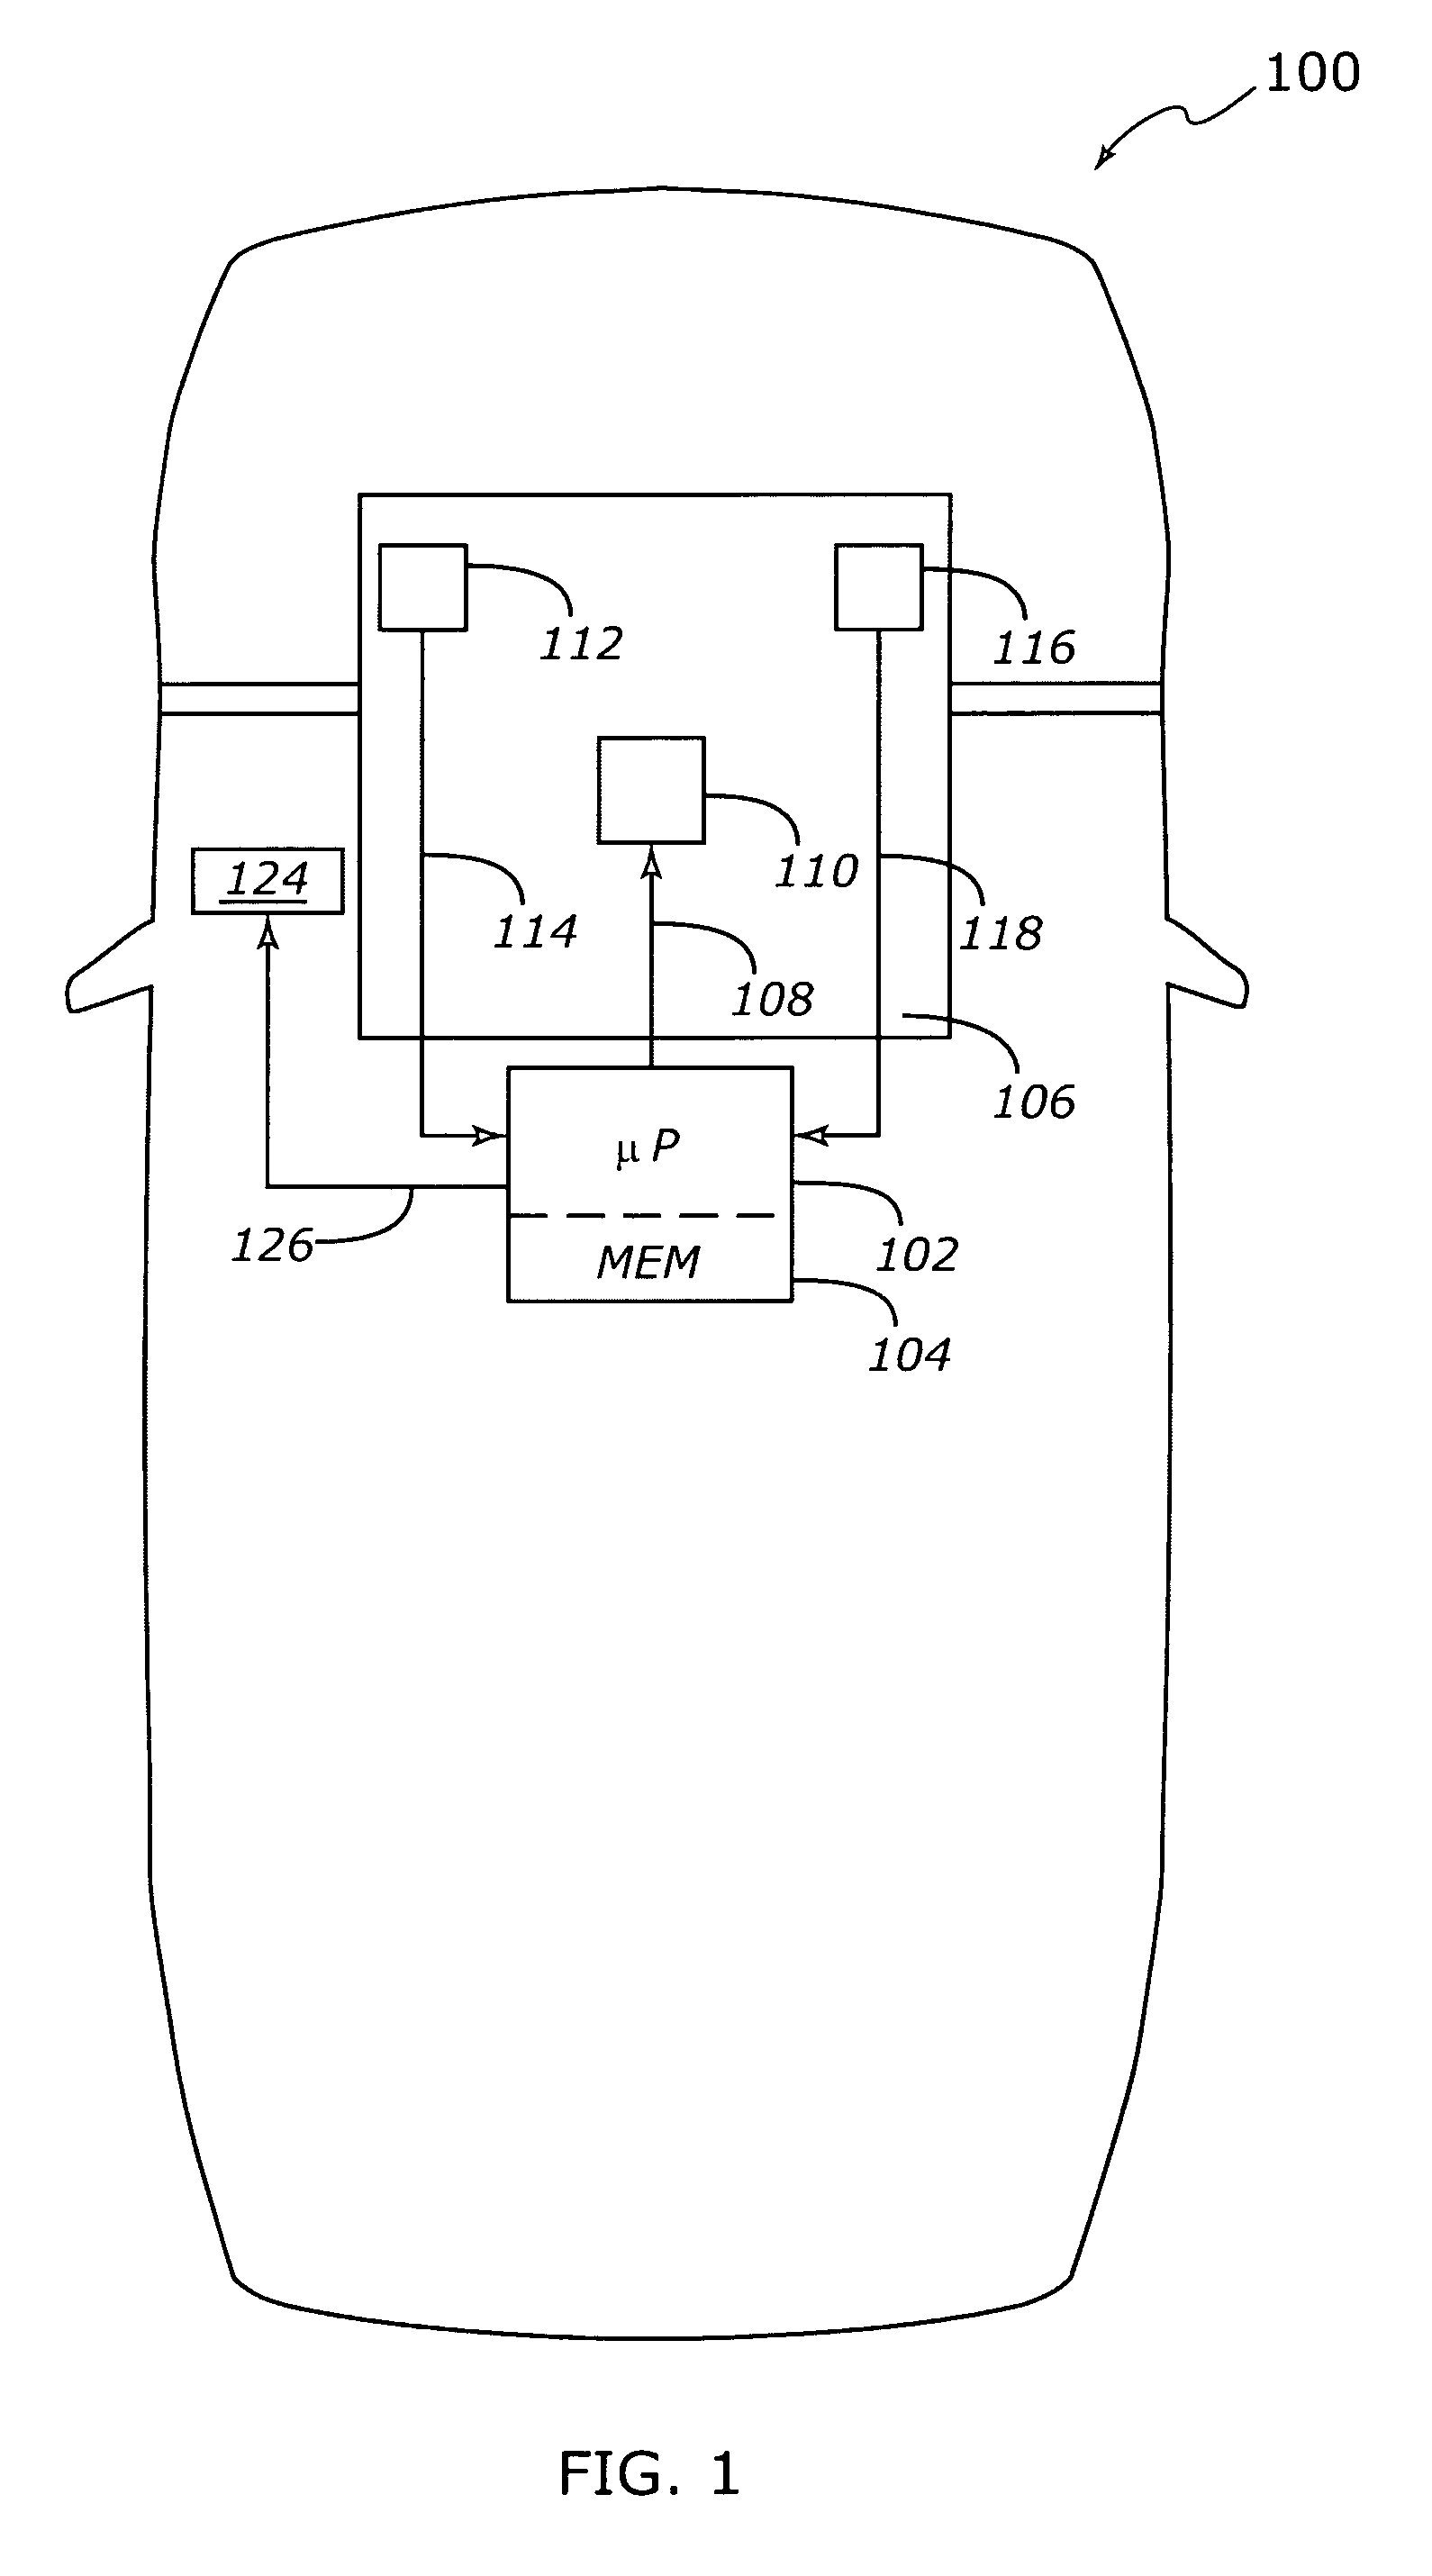 Method and apparatus for determining coolant temperature rationally in a motor vehicle